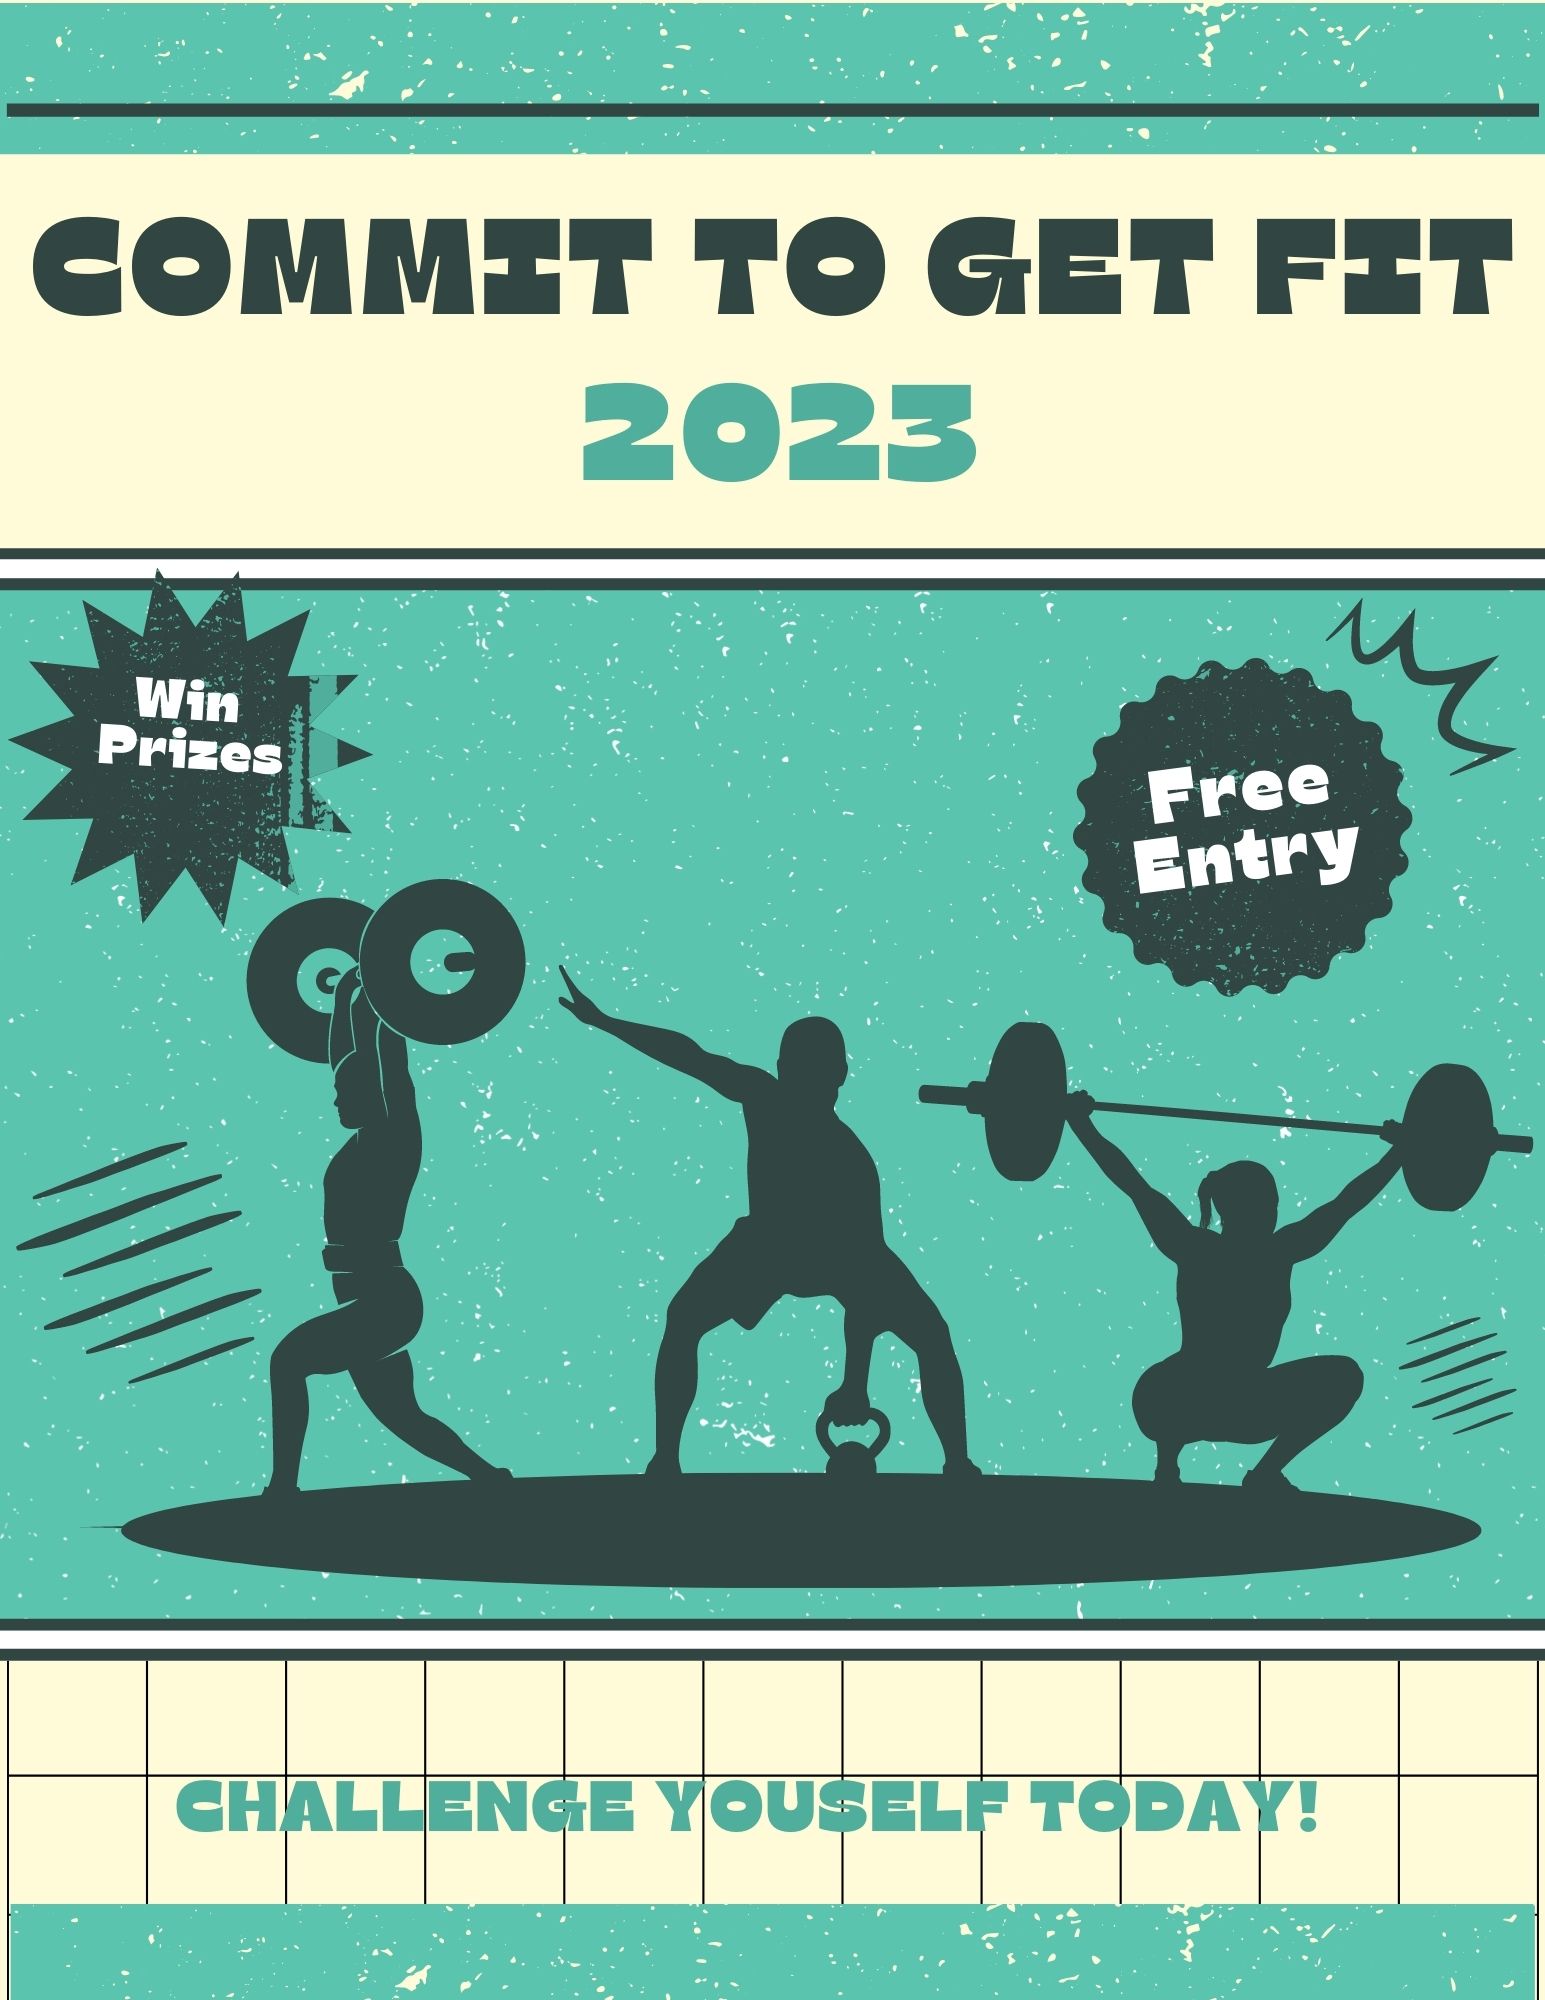 CTGF 2023 Commit To Get Fit